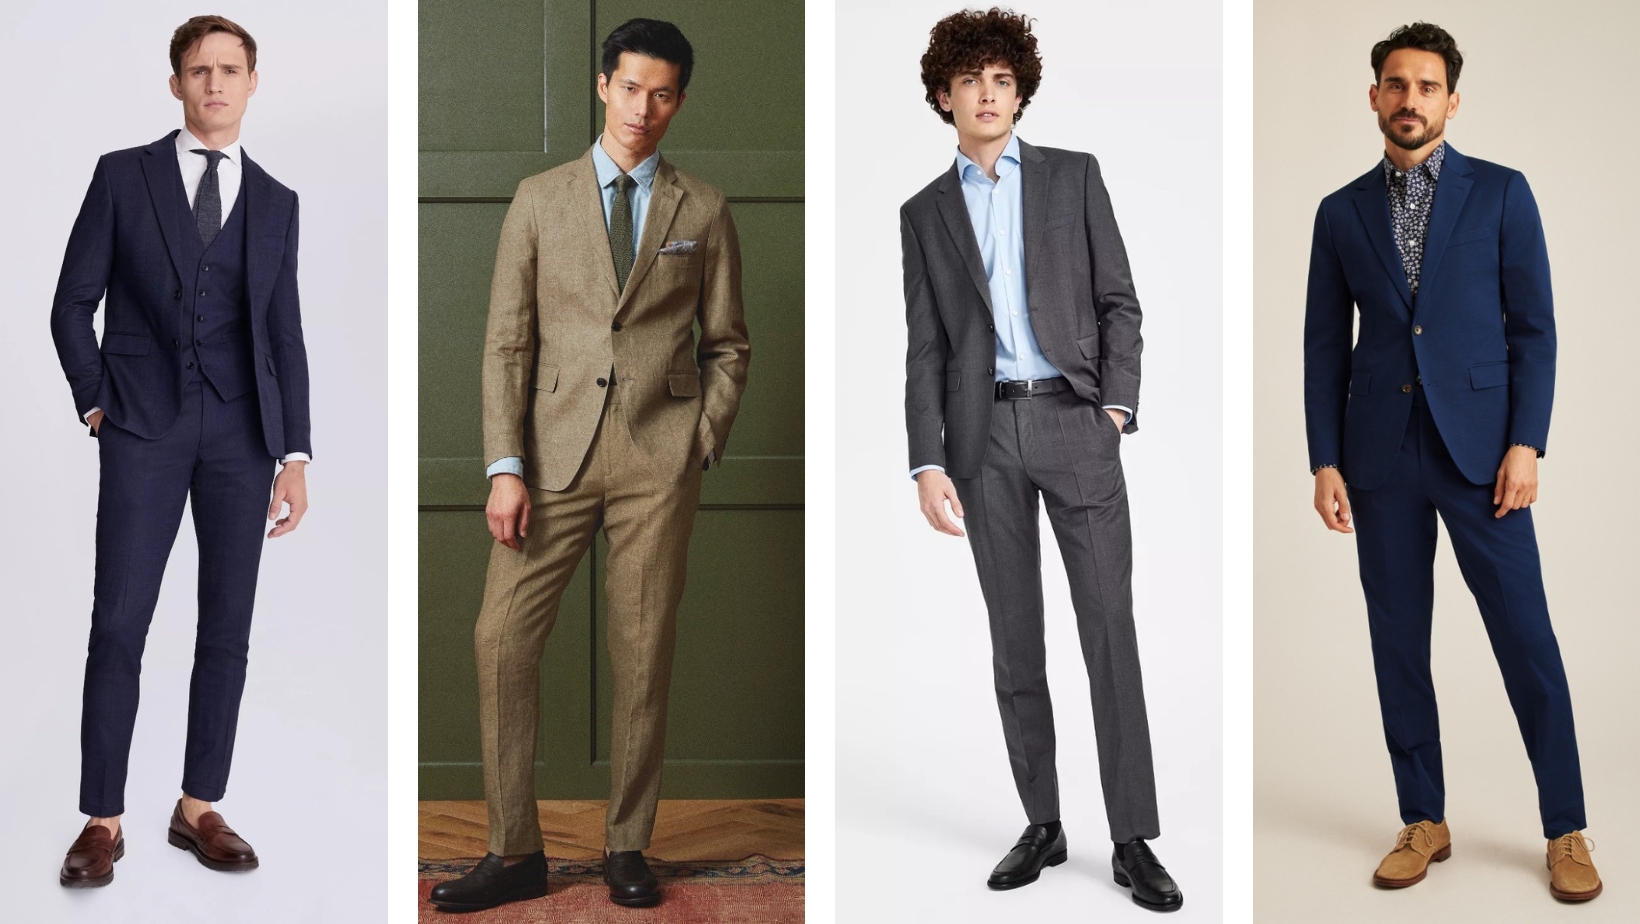 Mastering the Look: Tips and Trends for Men's Modern Wedding Suits’ Fashion